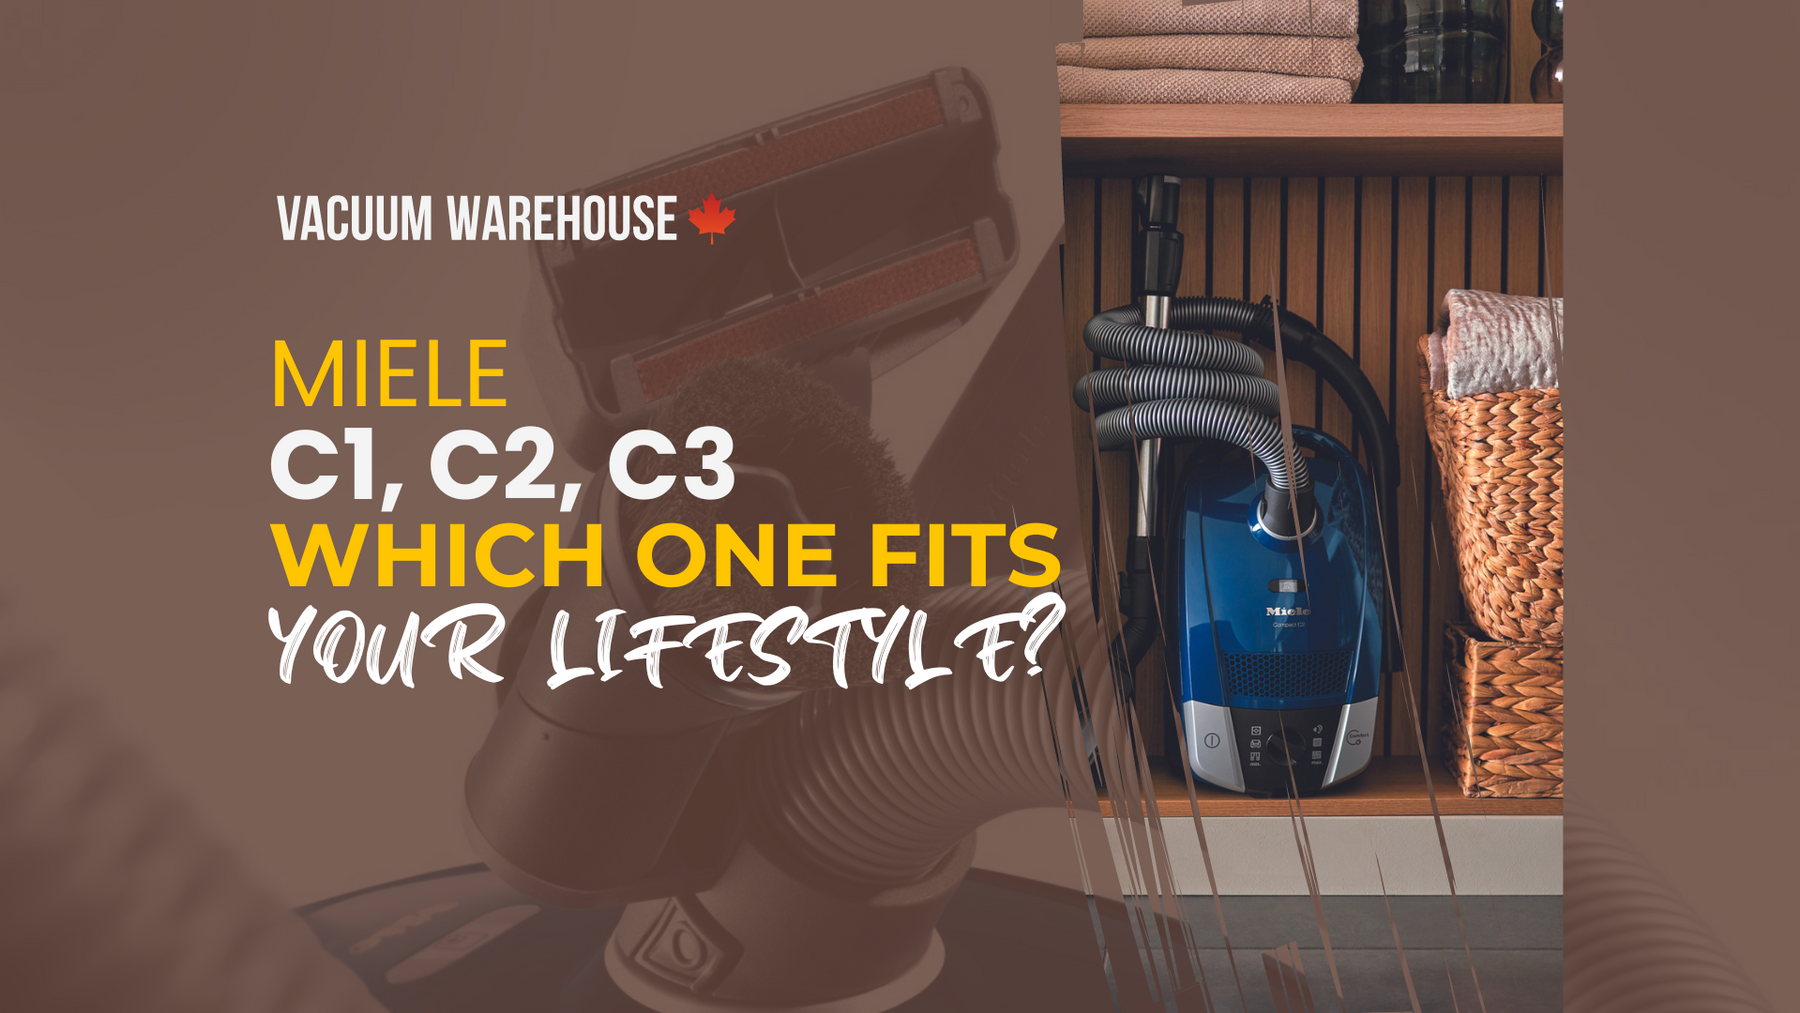 Decoding Miele C1, C2, C3: Which One Fits Your Lifestyle?